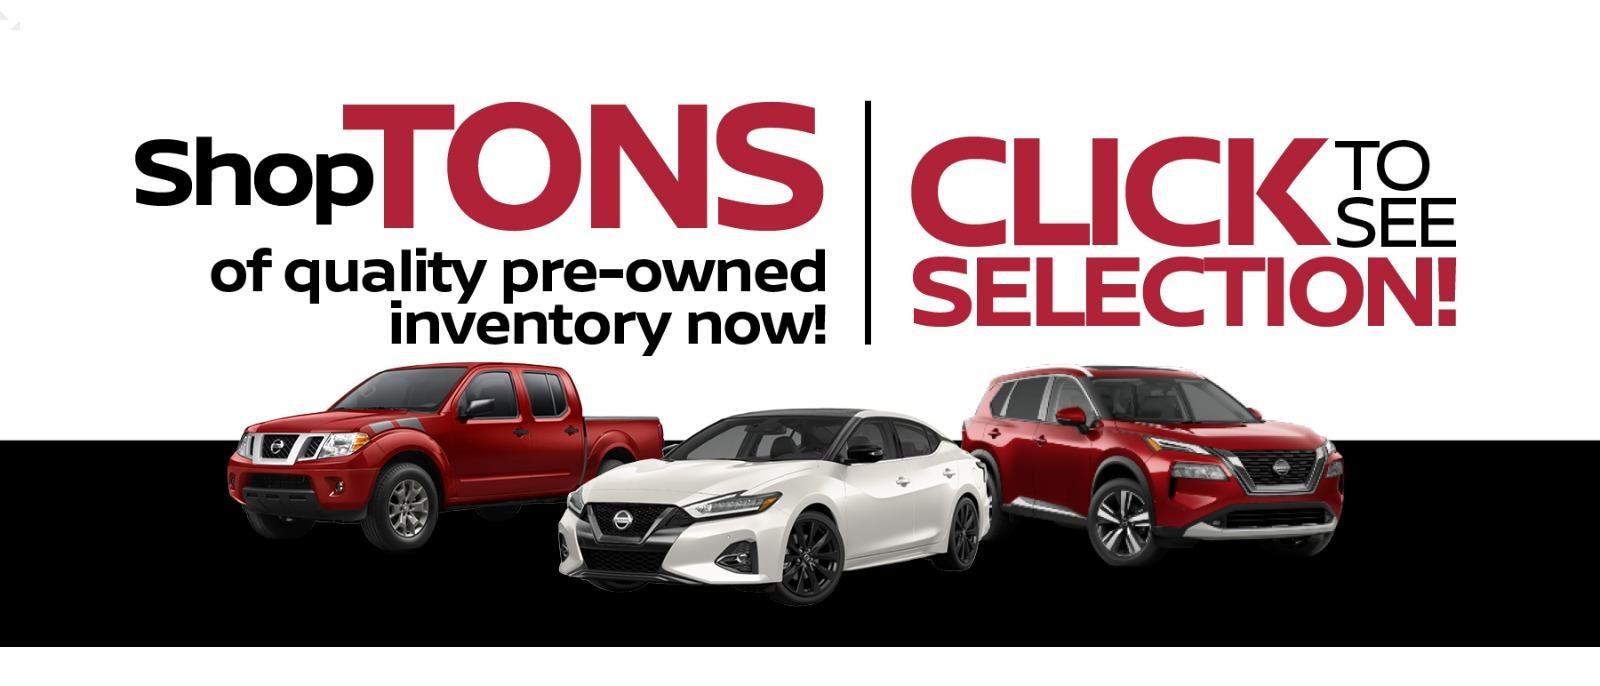 Click here to see our selection of pre-owned inventory!